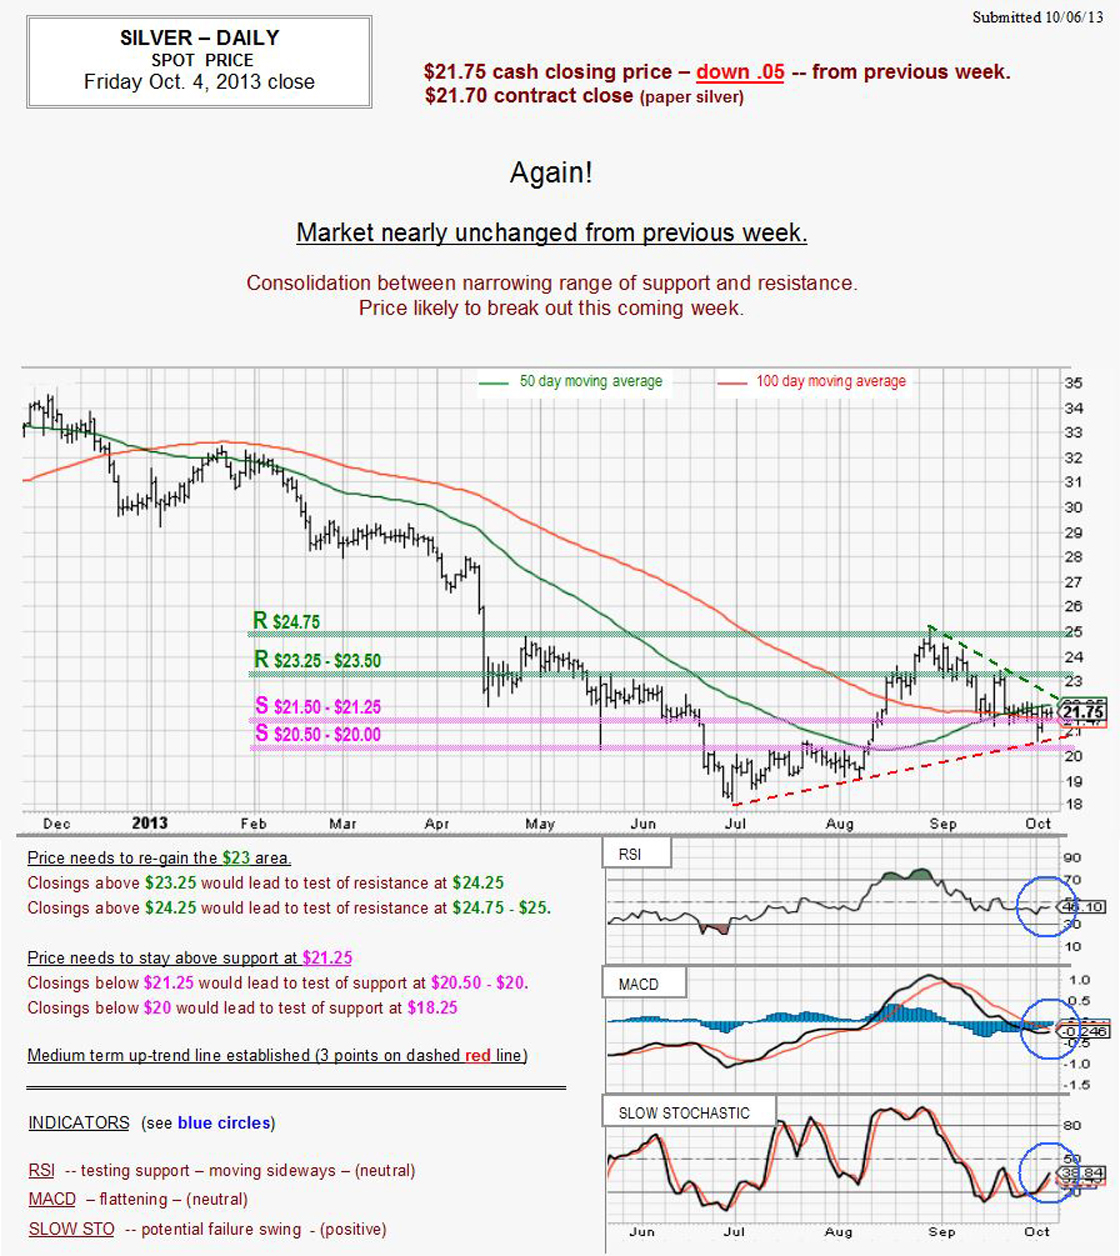 Oct 4, 2013 chart & commentary